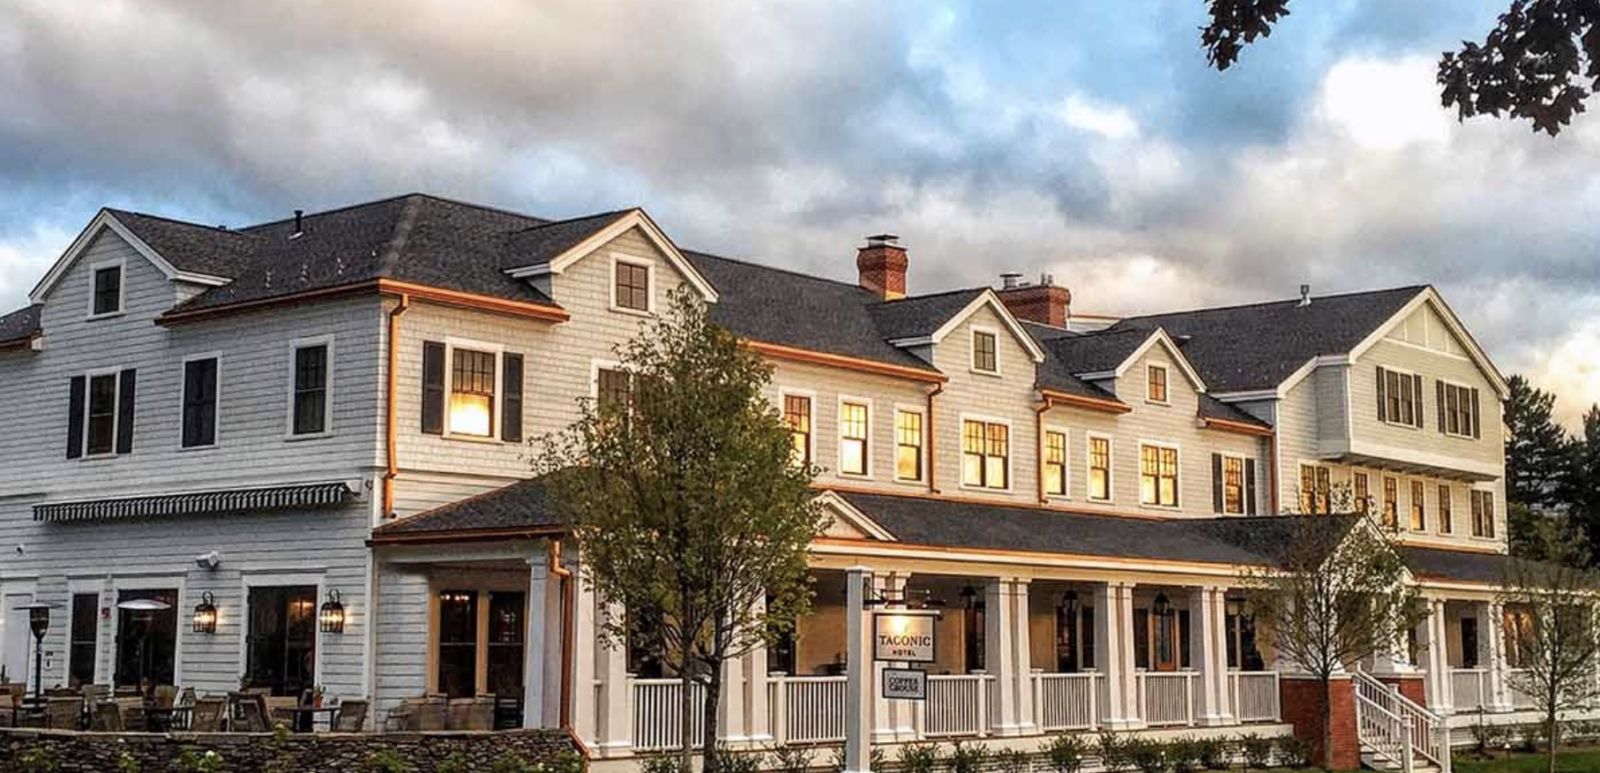 The Manchester hotel, Kimpton Taconic